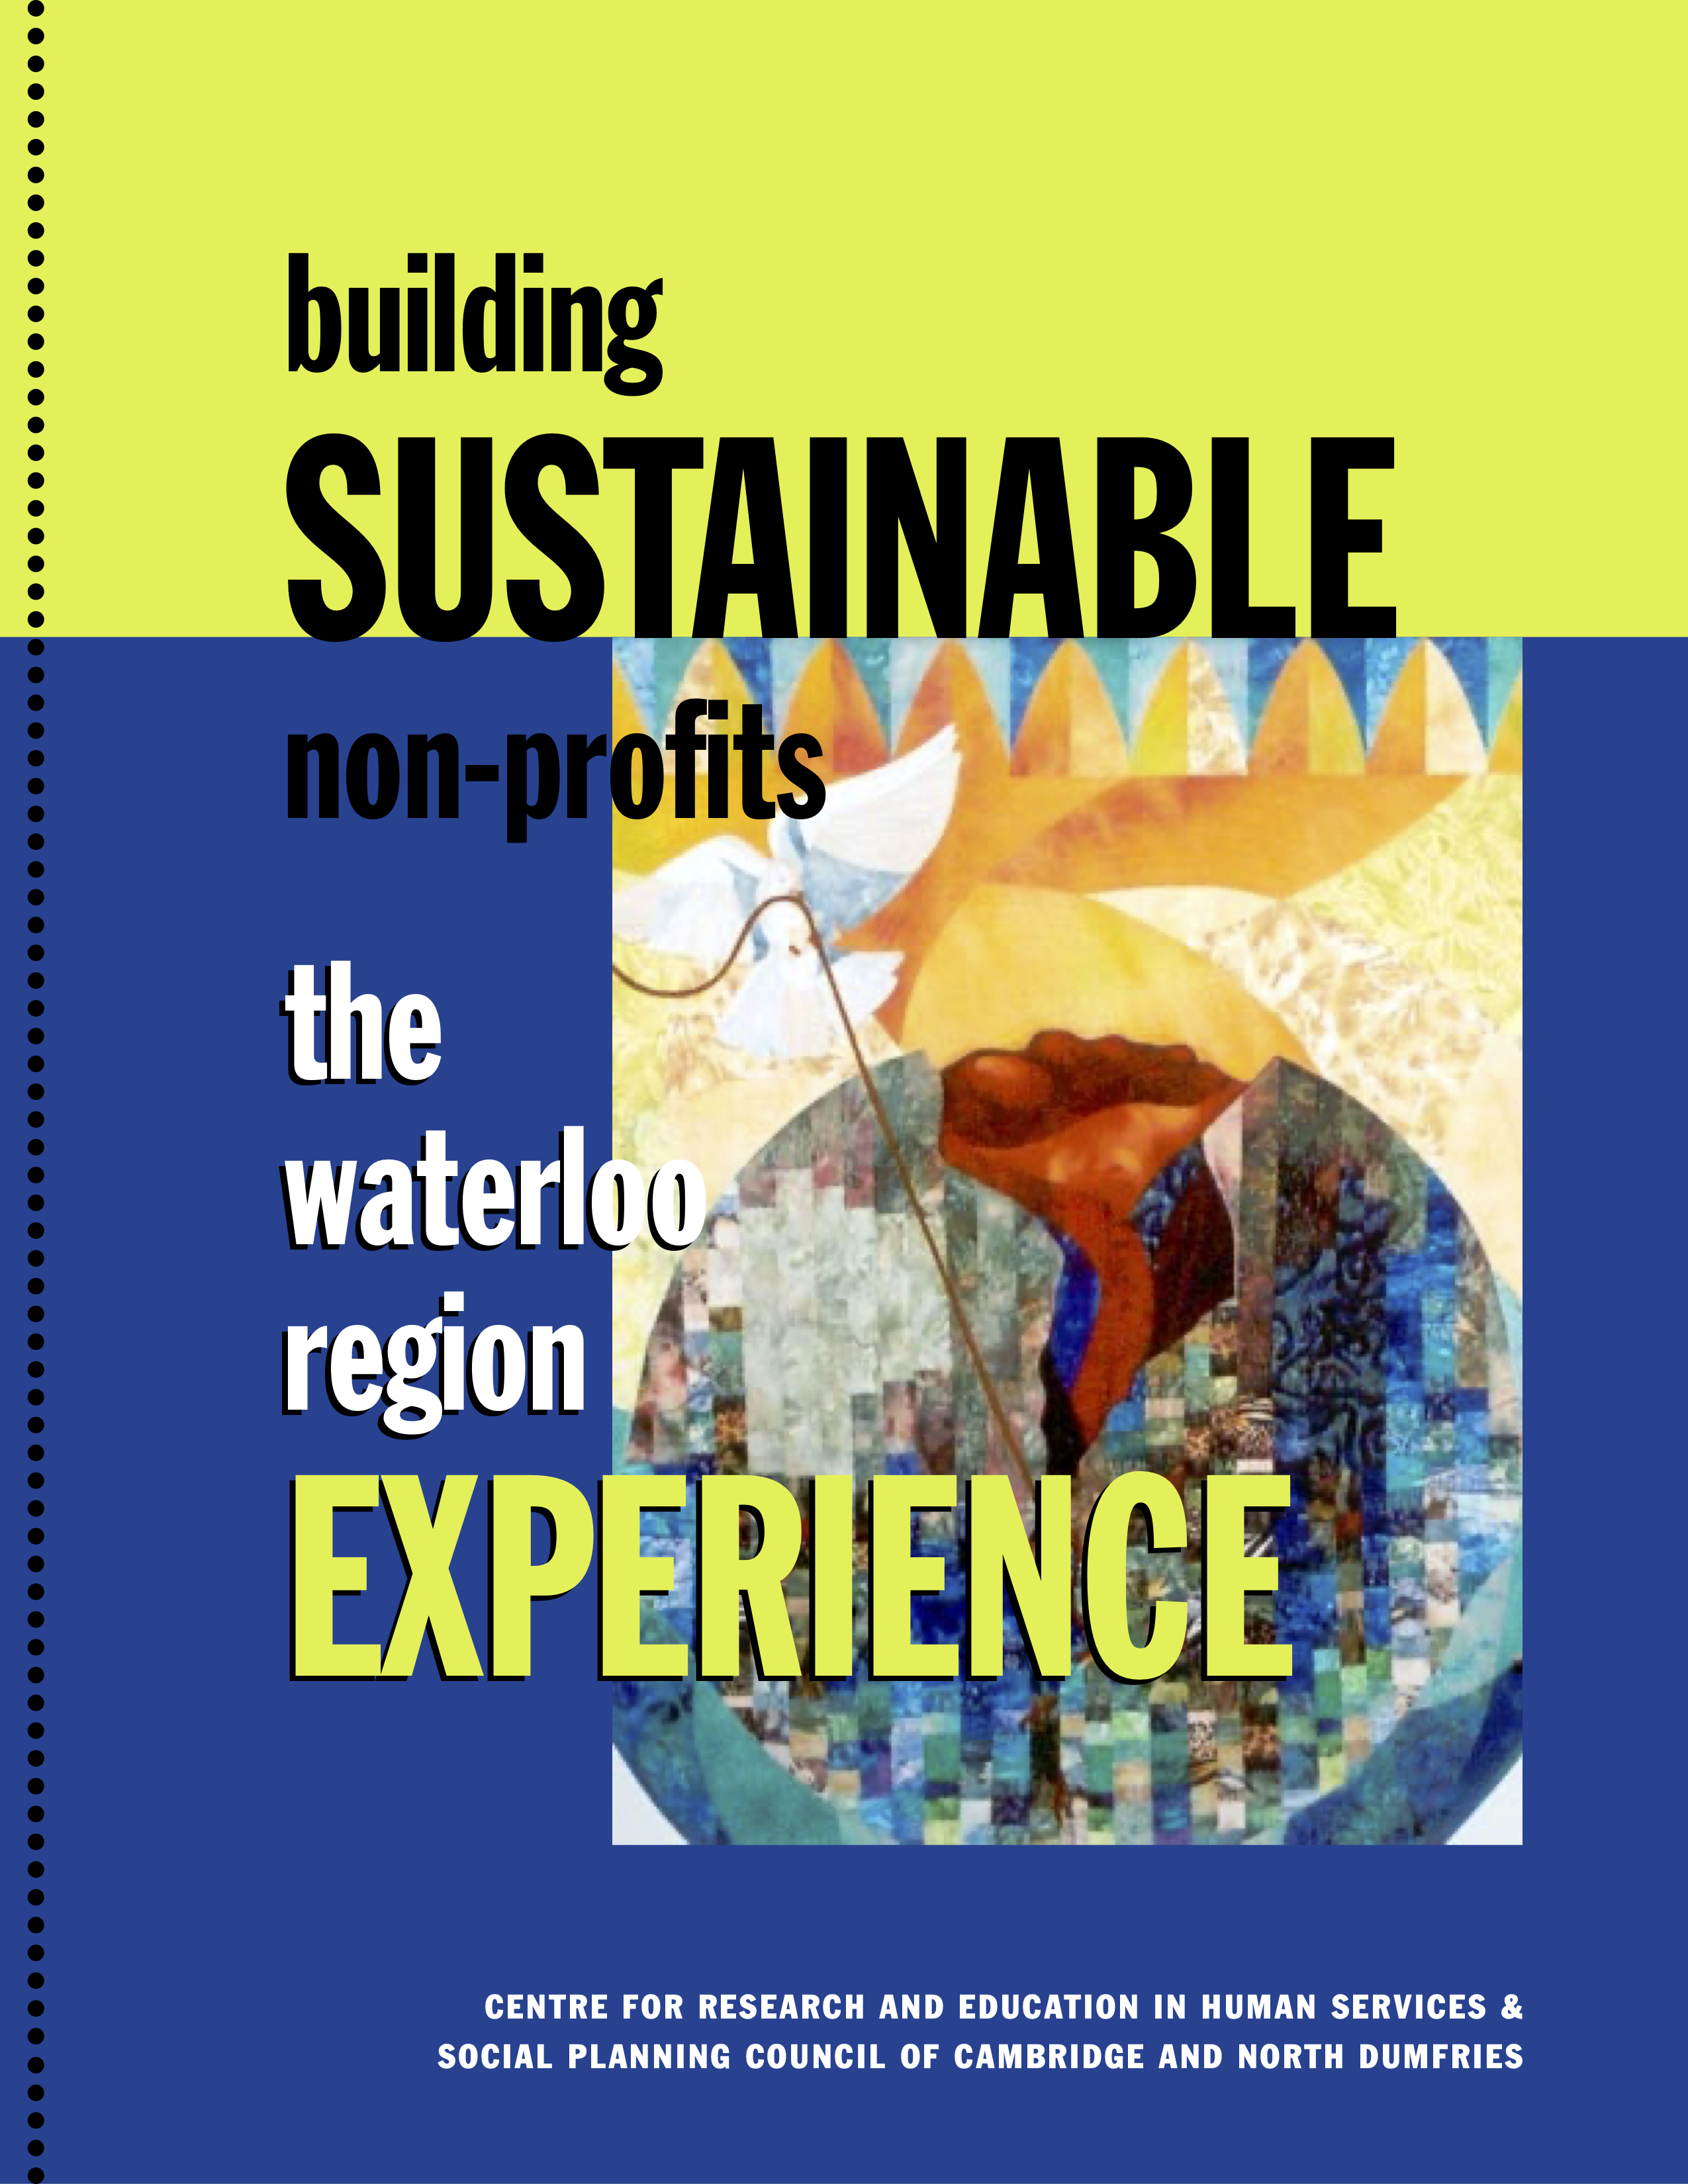 Building Sustainable Non-Profits: The Waterloo Region Experience